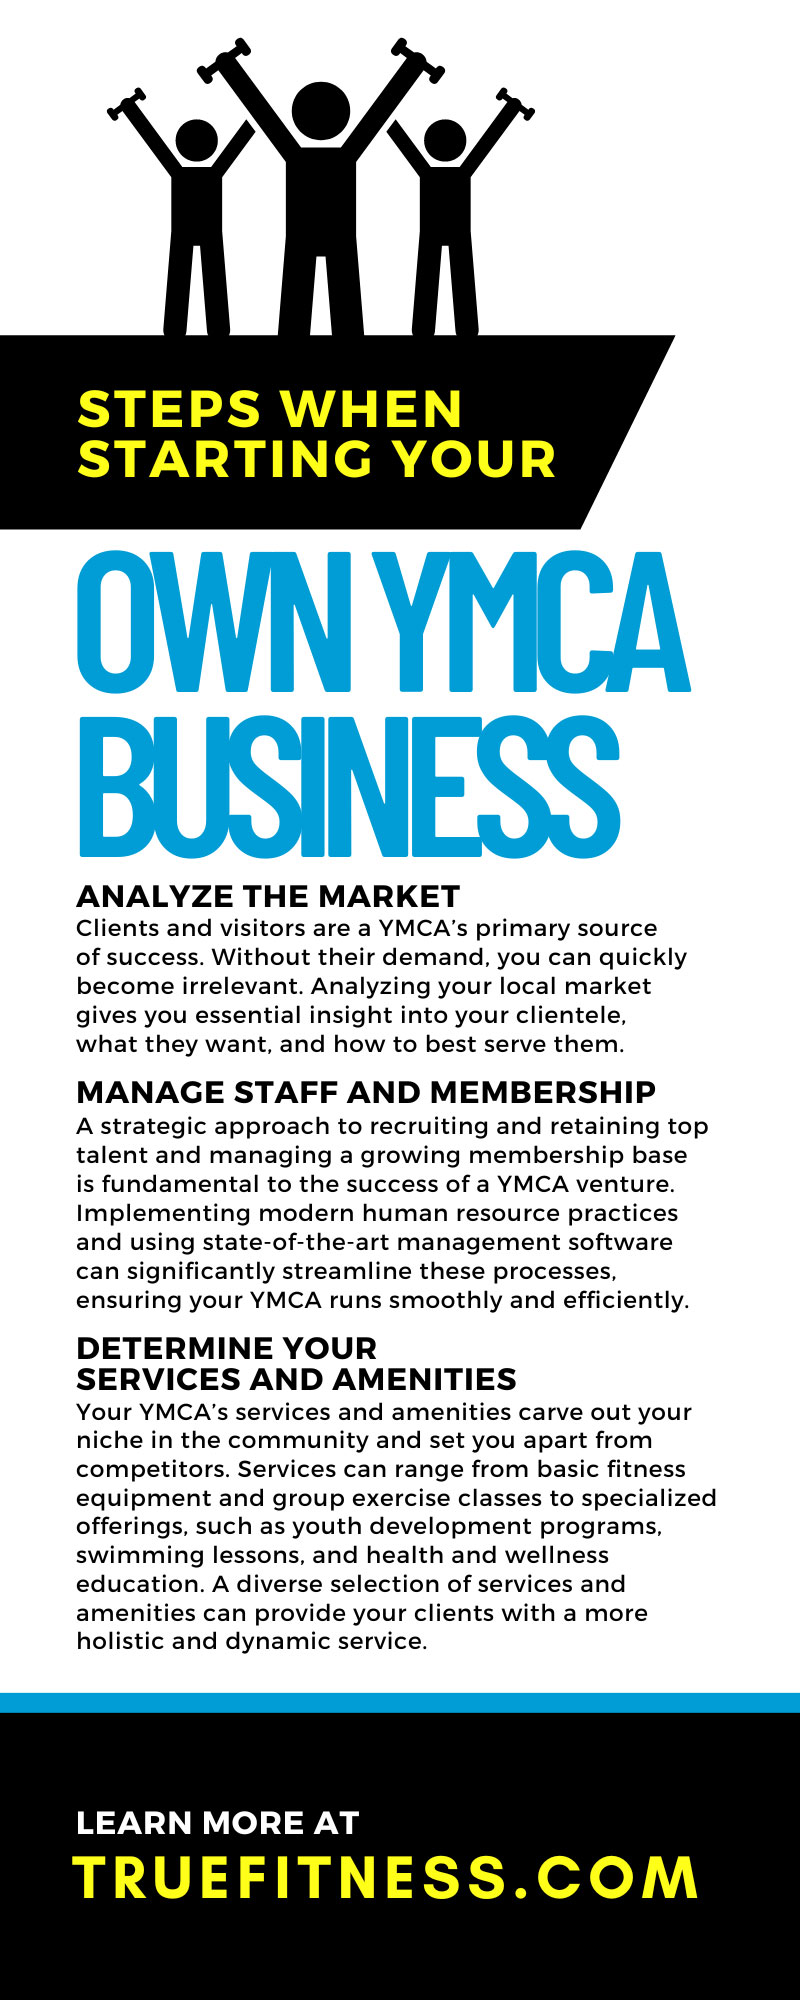 3 Steps When Starting Your Own YMCA Business
